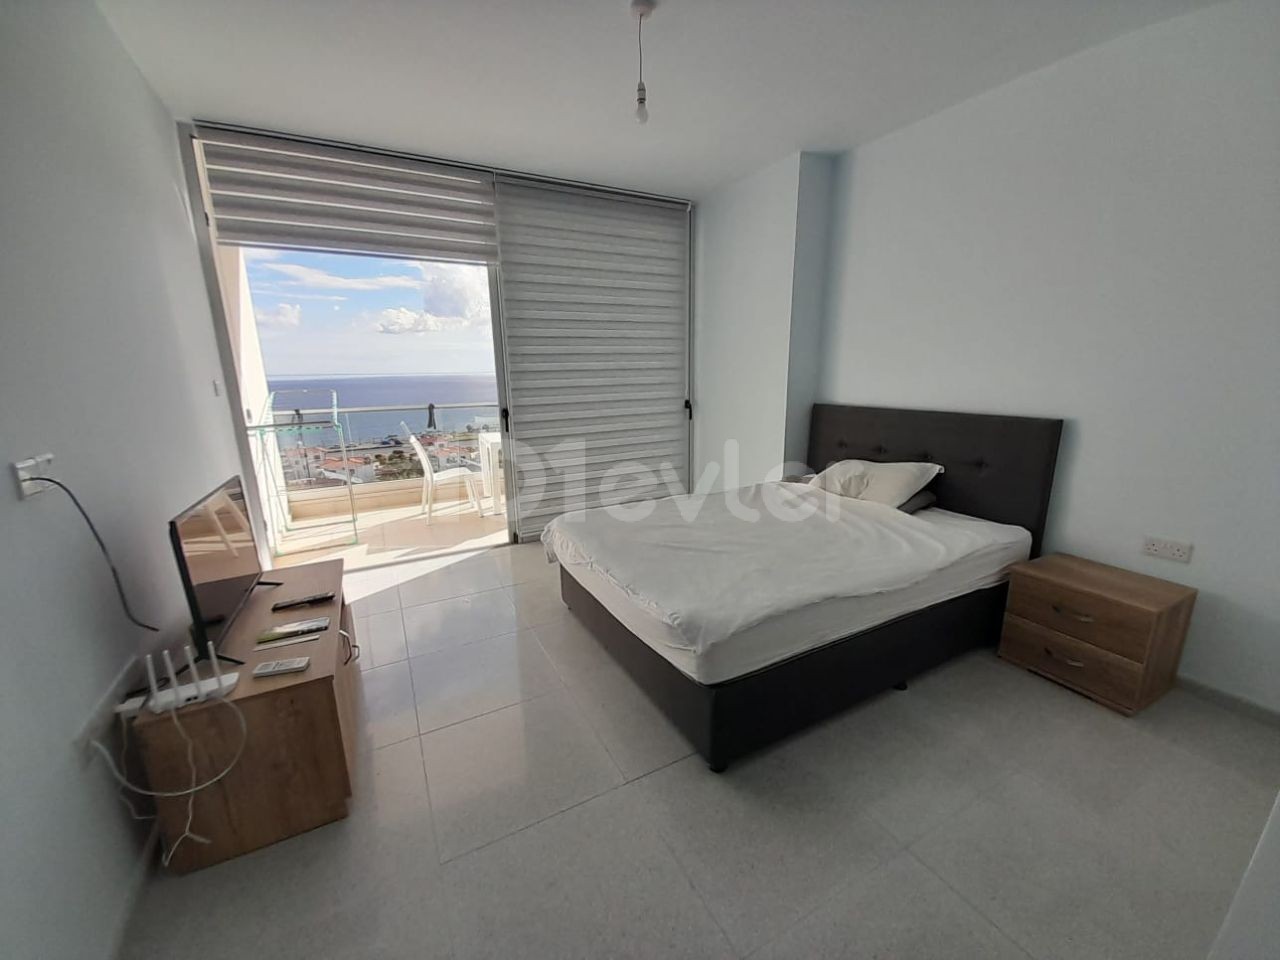 STUDY FLAT FOR SALE IN A SITE WITH SEA VIEW